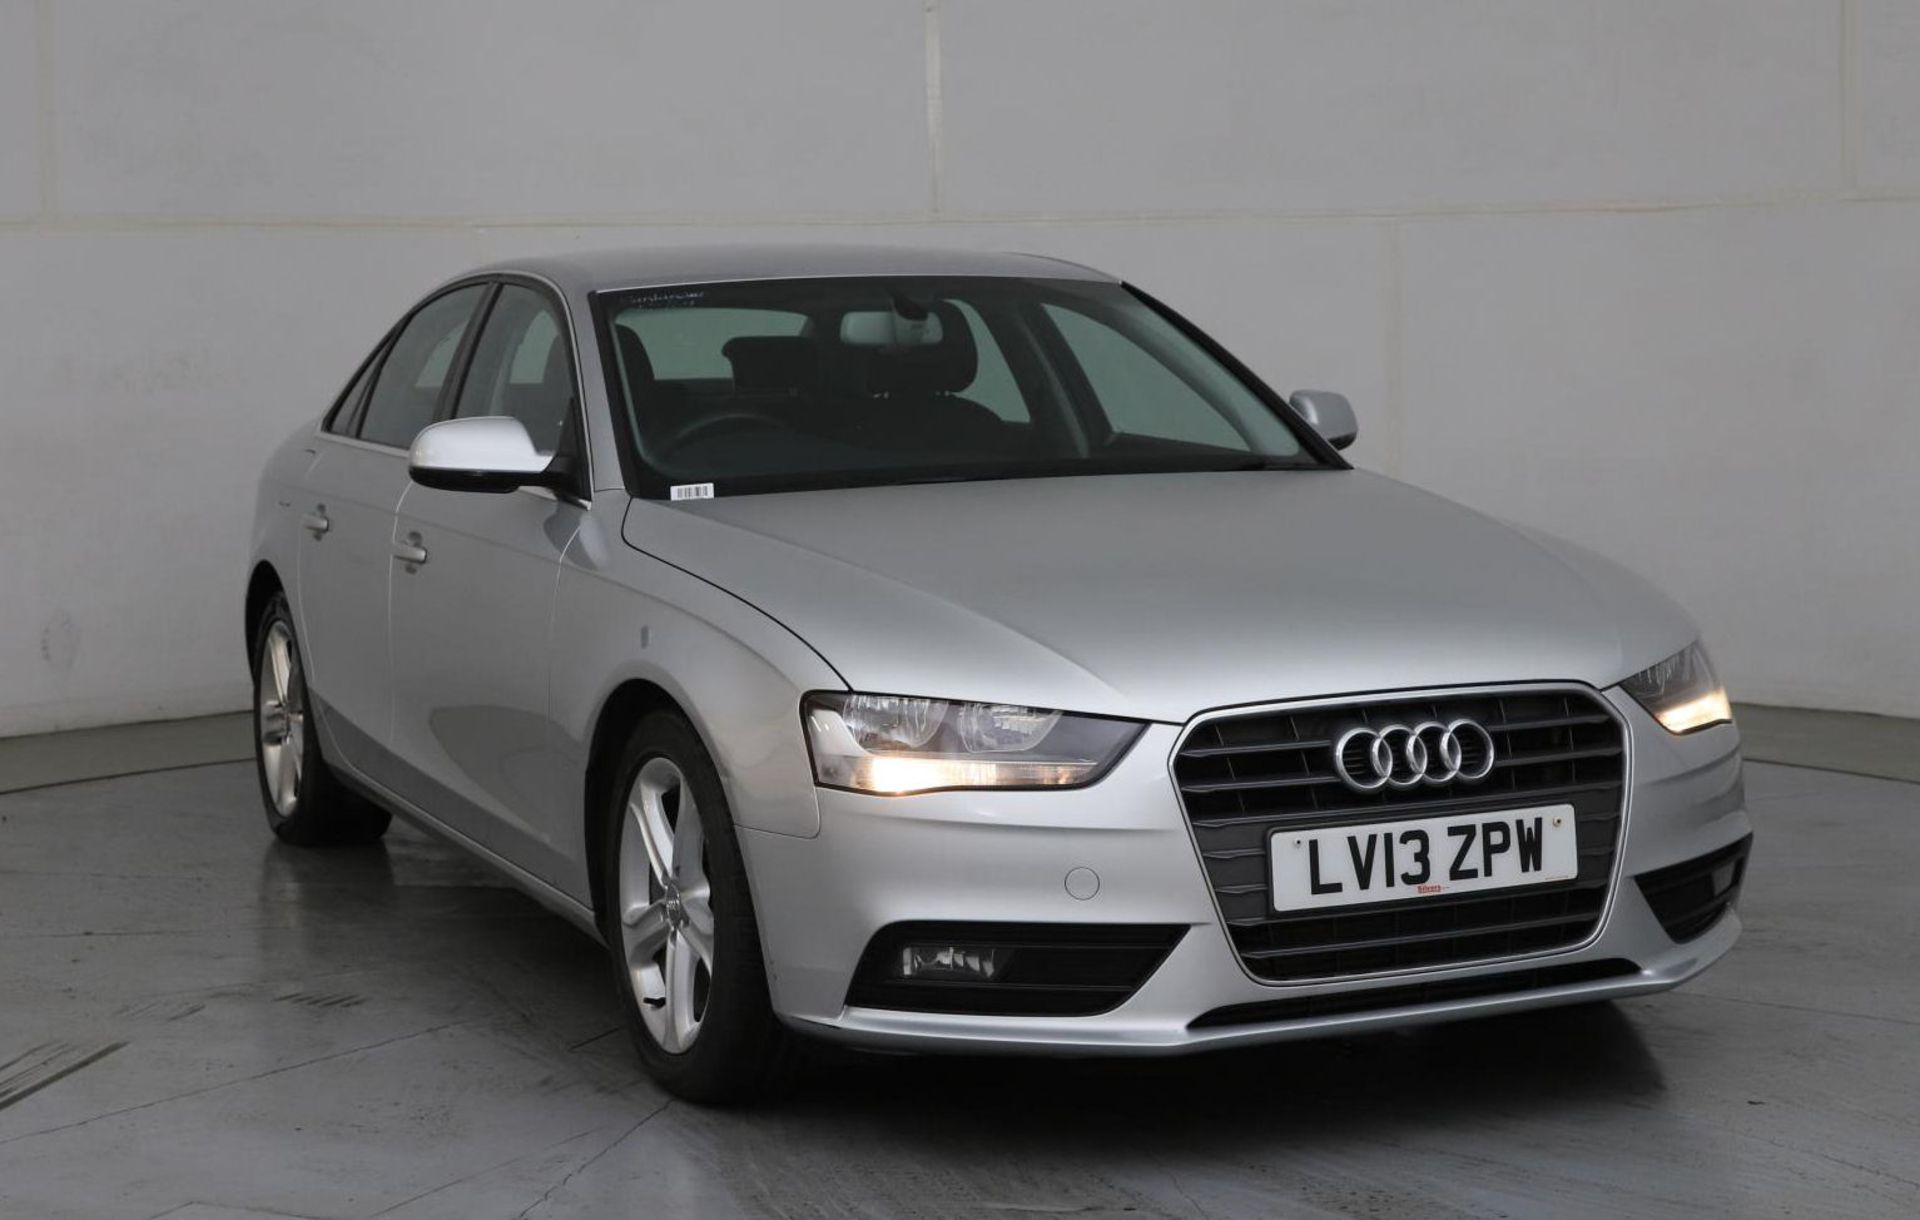 2013 Audi A4 2.0 Tdi SE 4 Door Saloon - CL505 - NO VAT ON THE HAMMER - Location: Corby